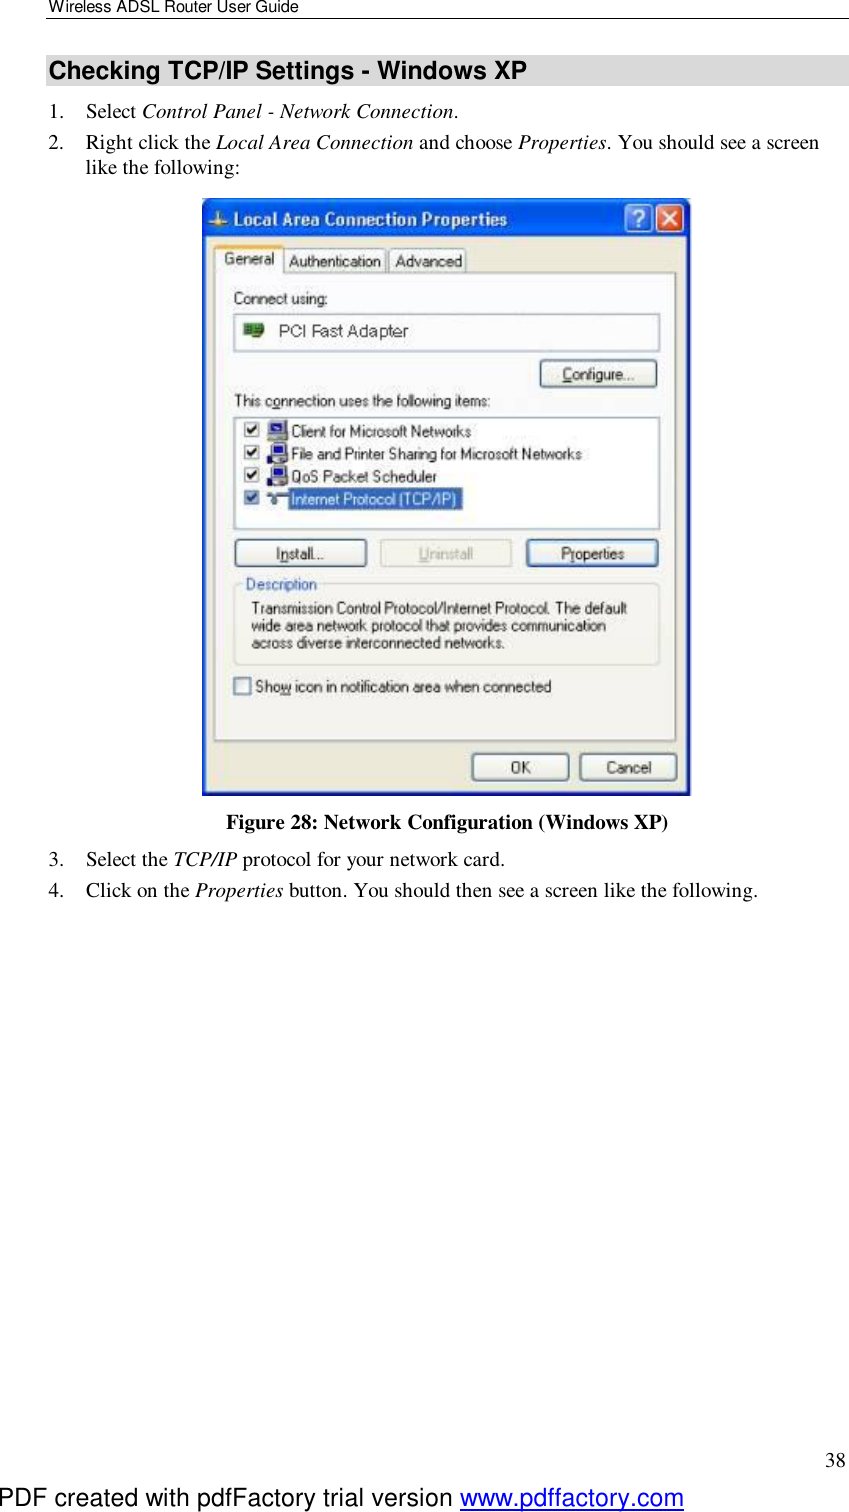 Wireless ADSL Router User Guide 38 Checking TCP/IP Settings - Windows XP 1. Select Control Panel - Network Connection. 2. Right click the Local Area Connection and choose Properties. You should see a screen like the following:  Figure 28: Network Configuration (Windows XP) 3. Select the TCP/IP protocol for your network card. 4. Click on the Properties button. You should then see a screen like the following. PDF created with pdfFactory trial version www.pdffactory.com